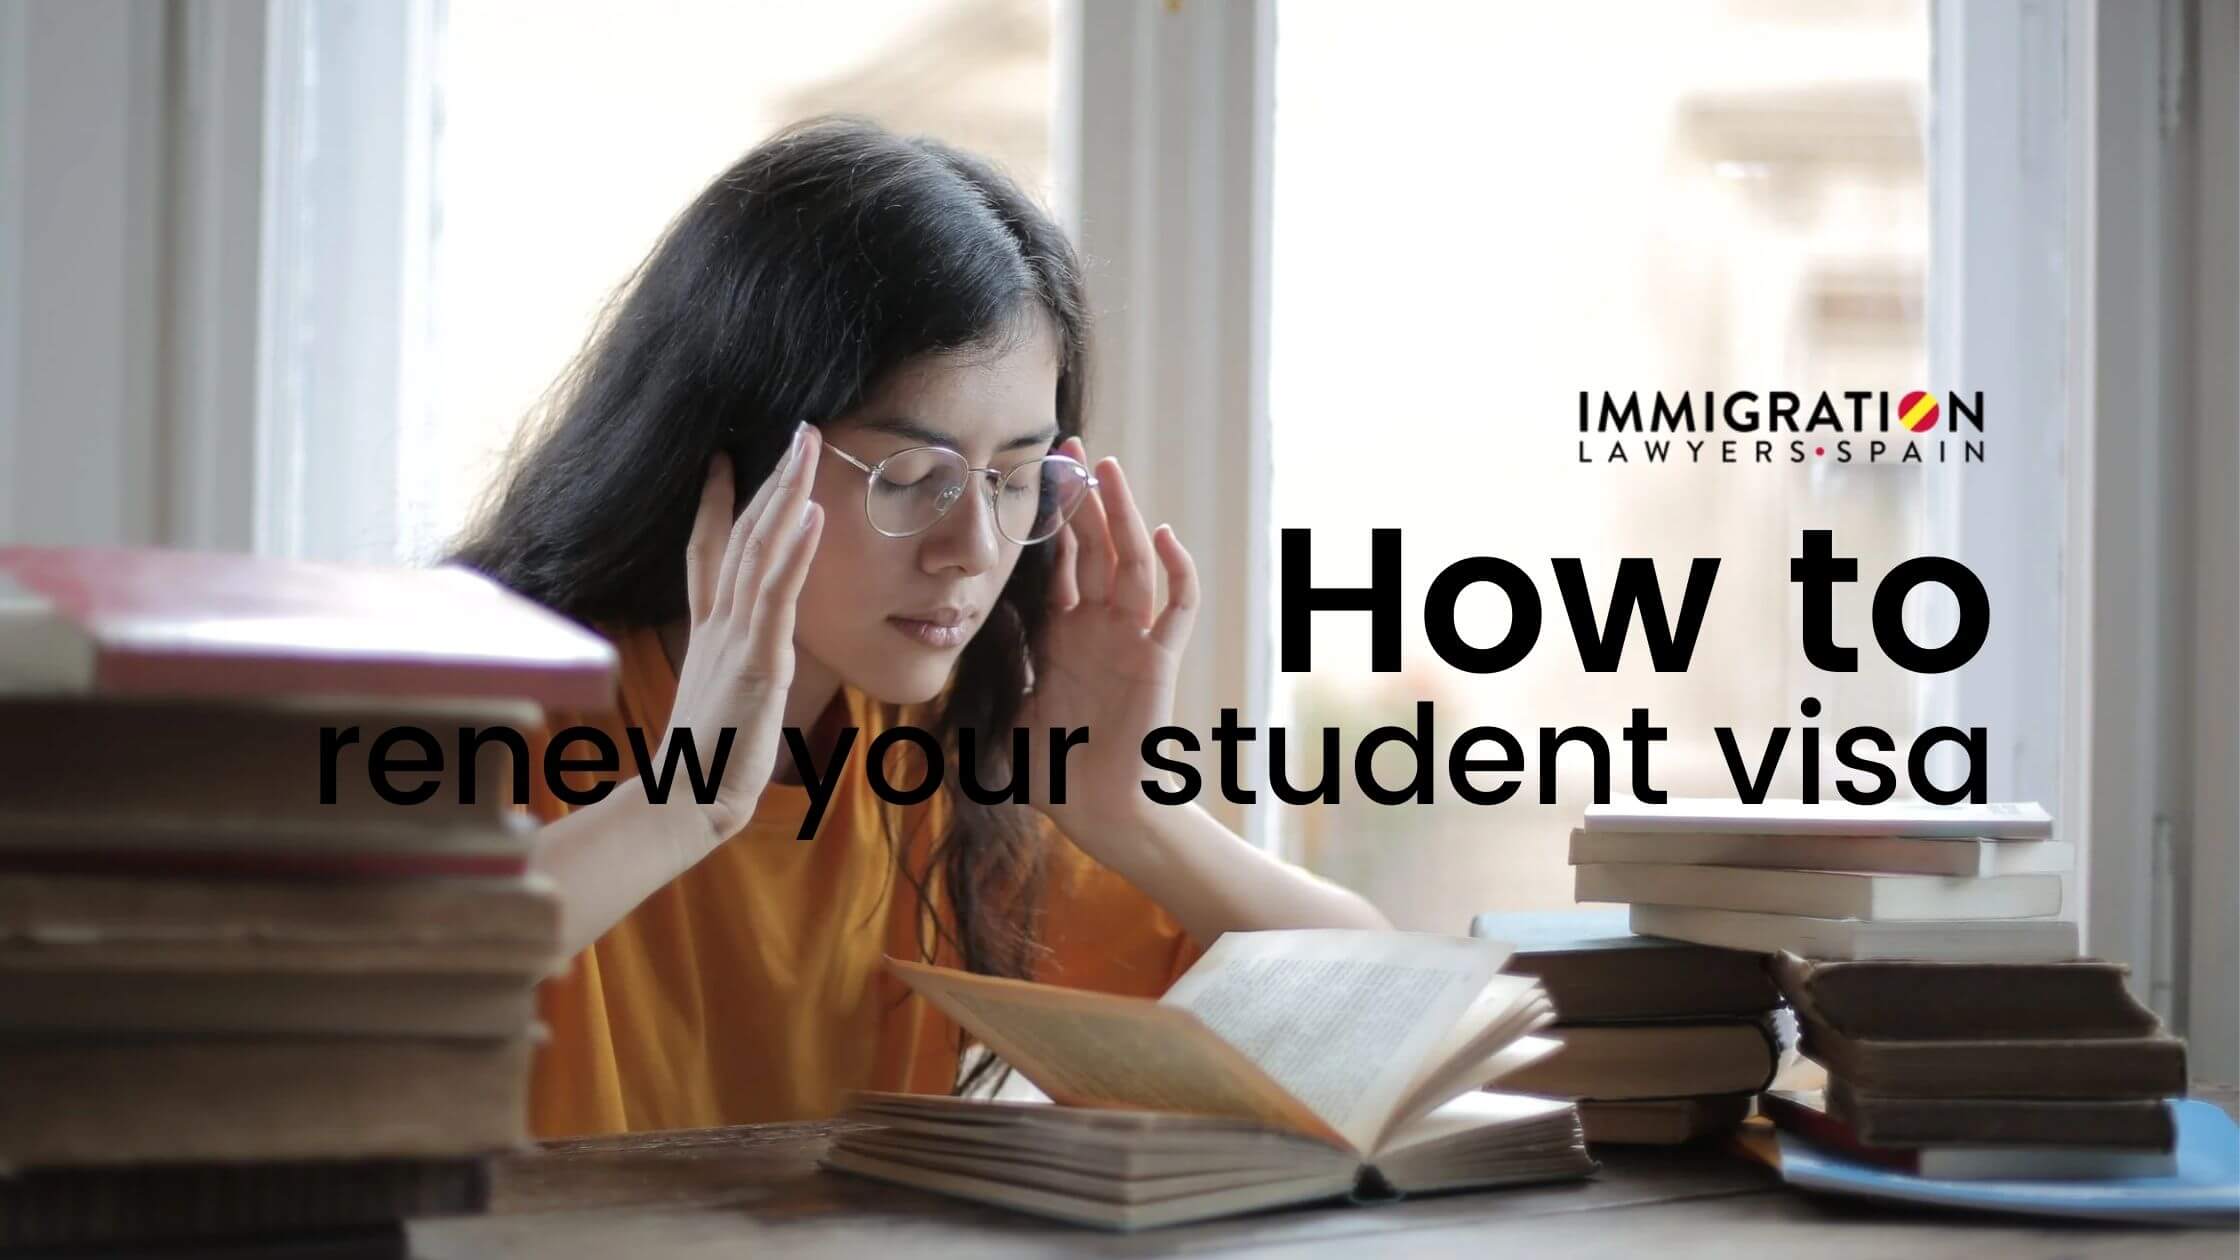 how to renew student visa in Spain